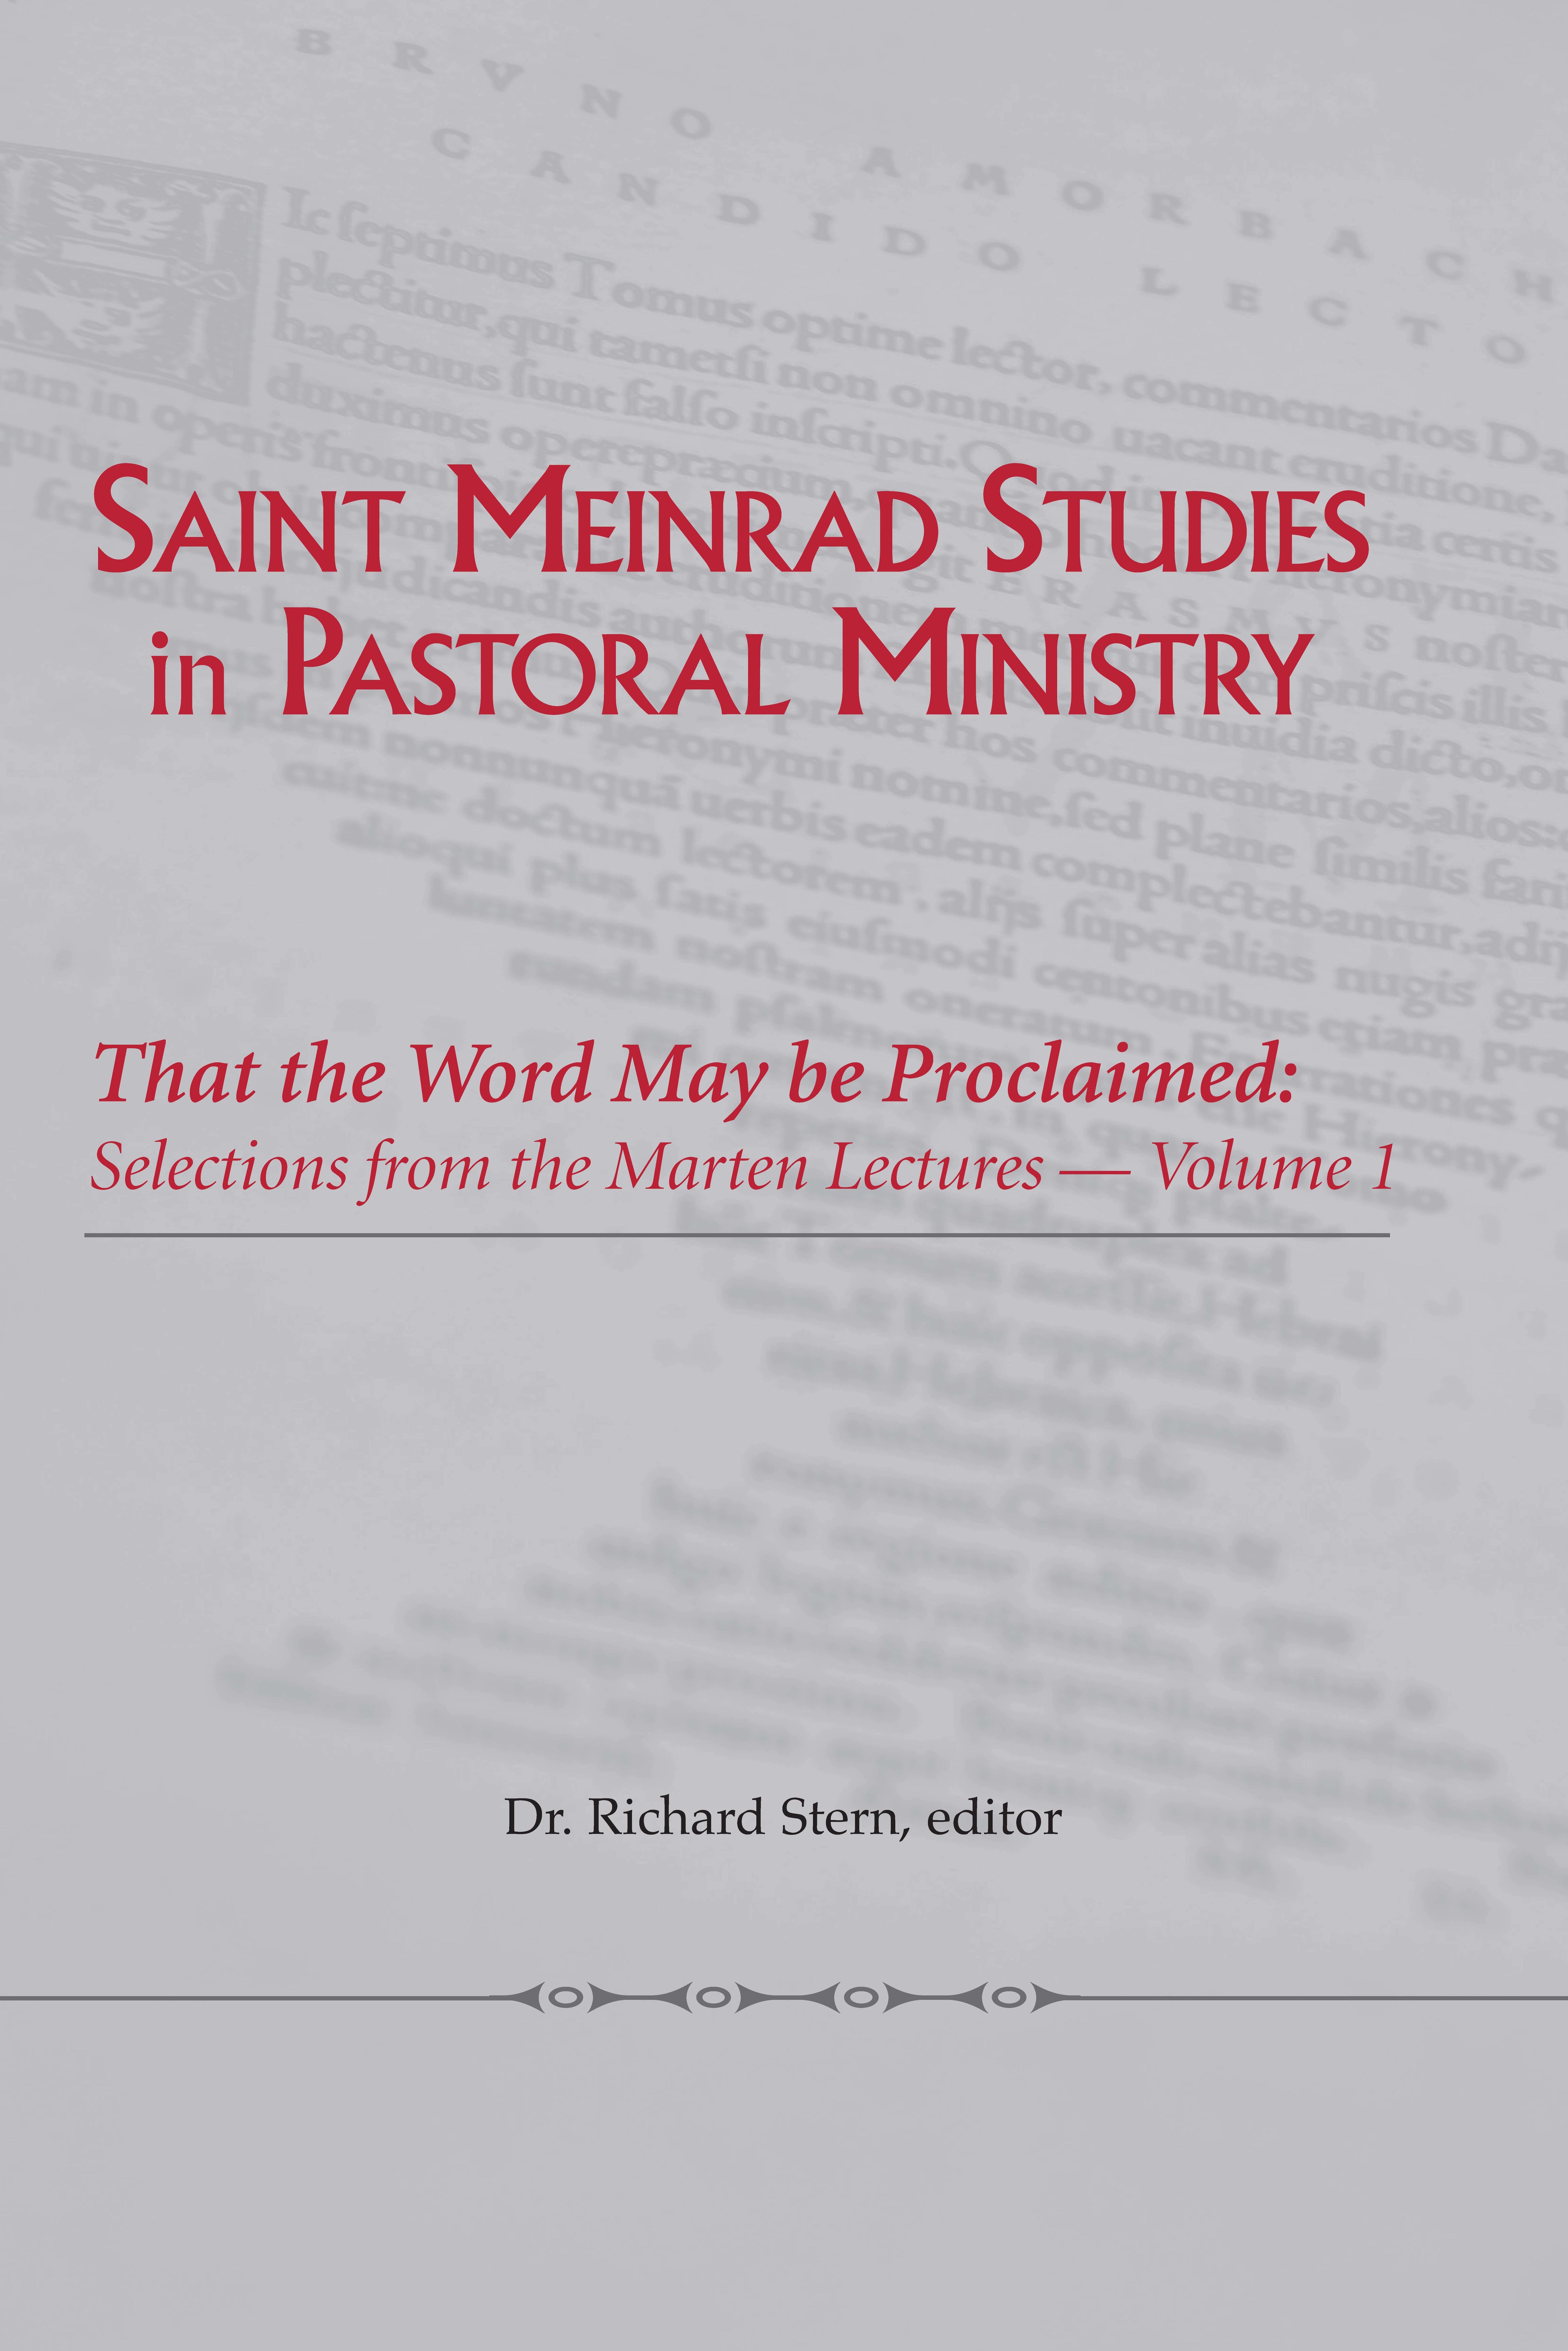 Saint Meinrad Studies in Pastoral Ministry No. 3: Marten Lectures cover with plain gray background over watermarked text and red lettering for the title